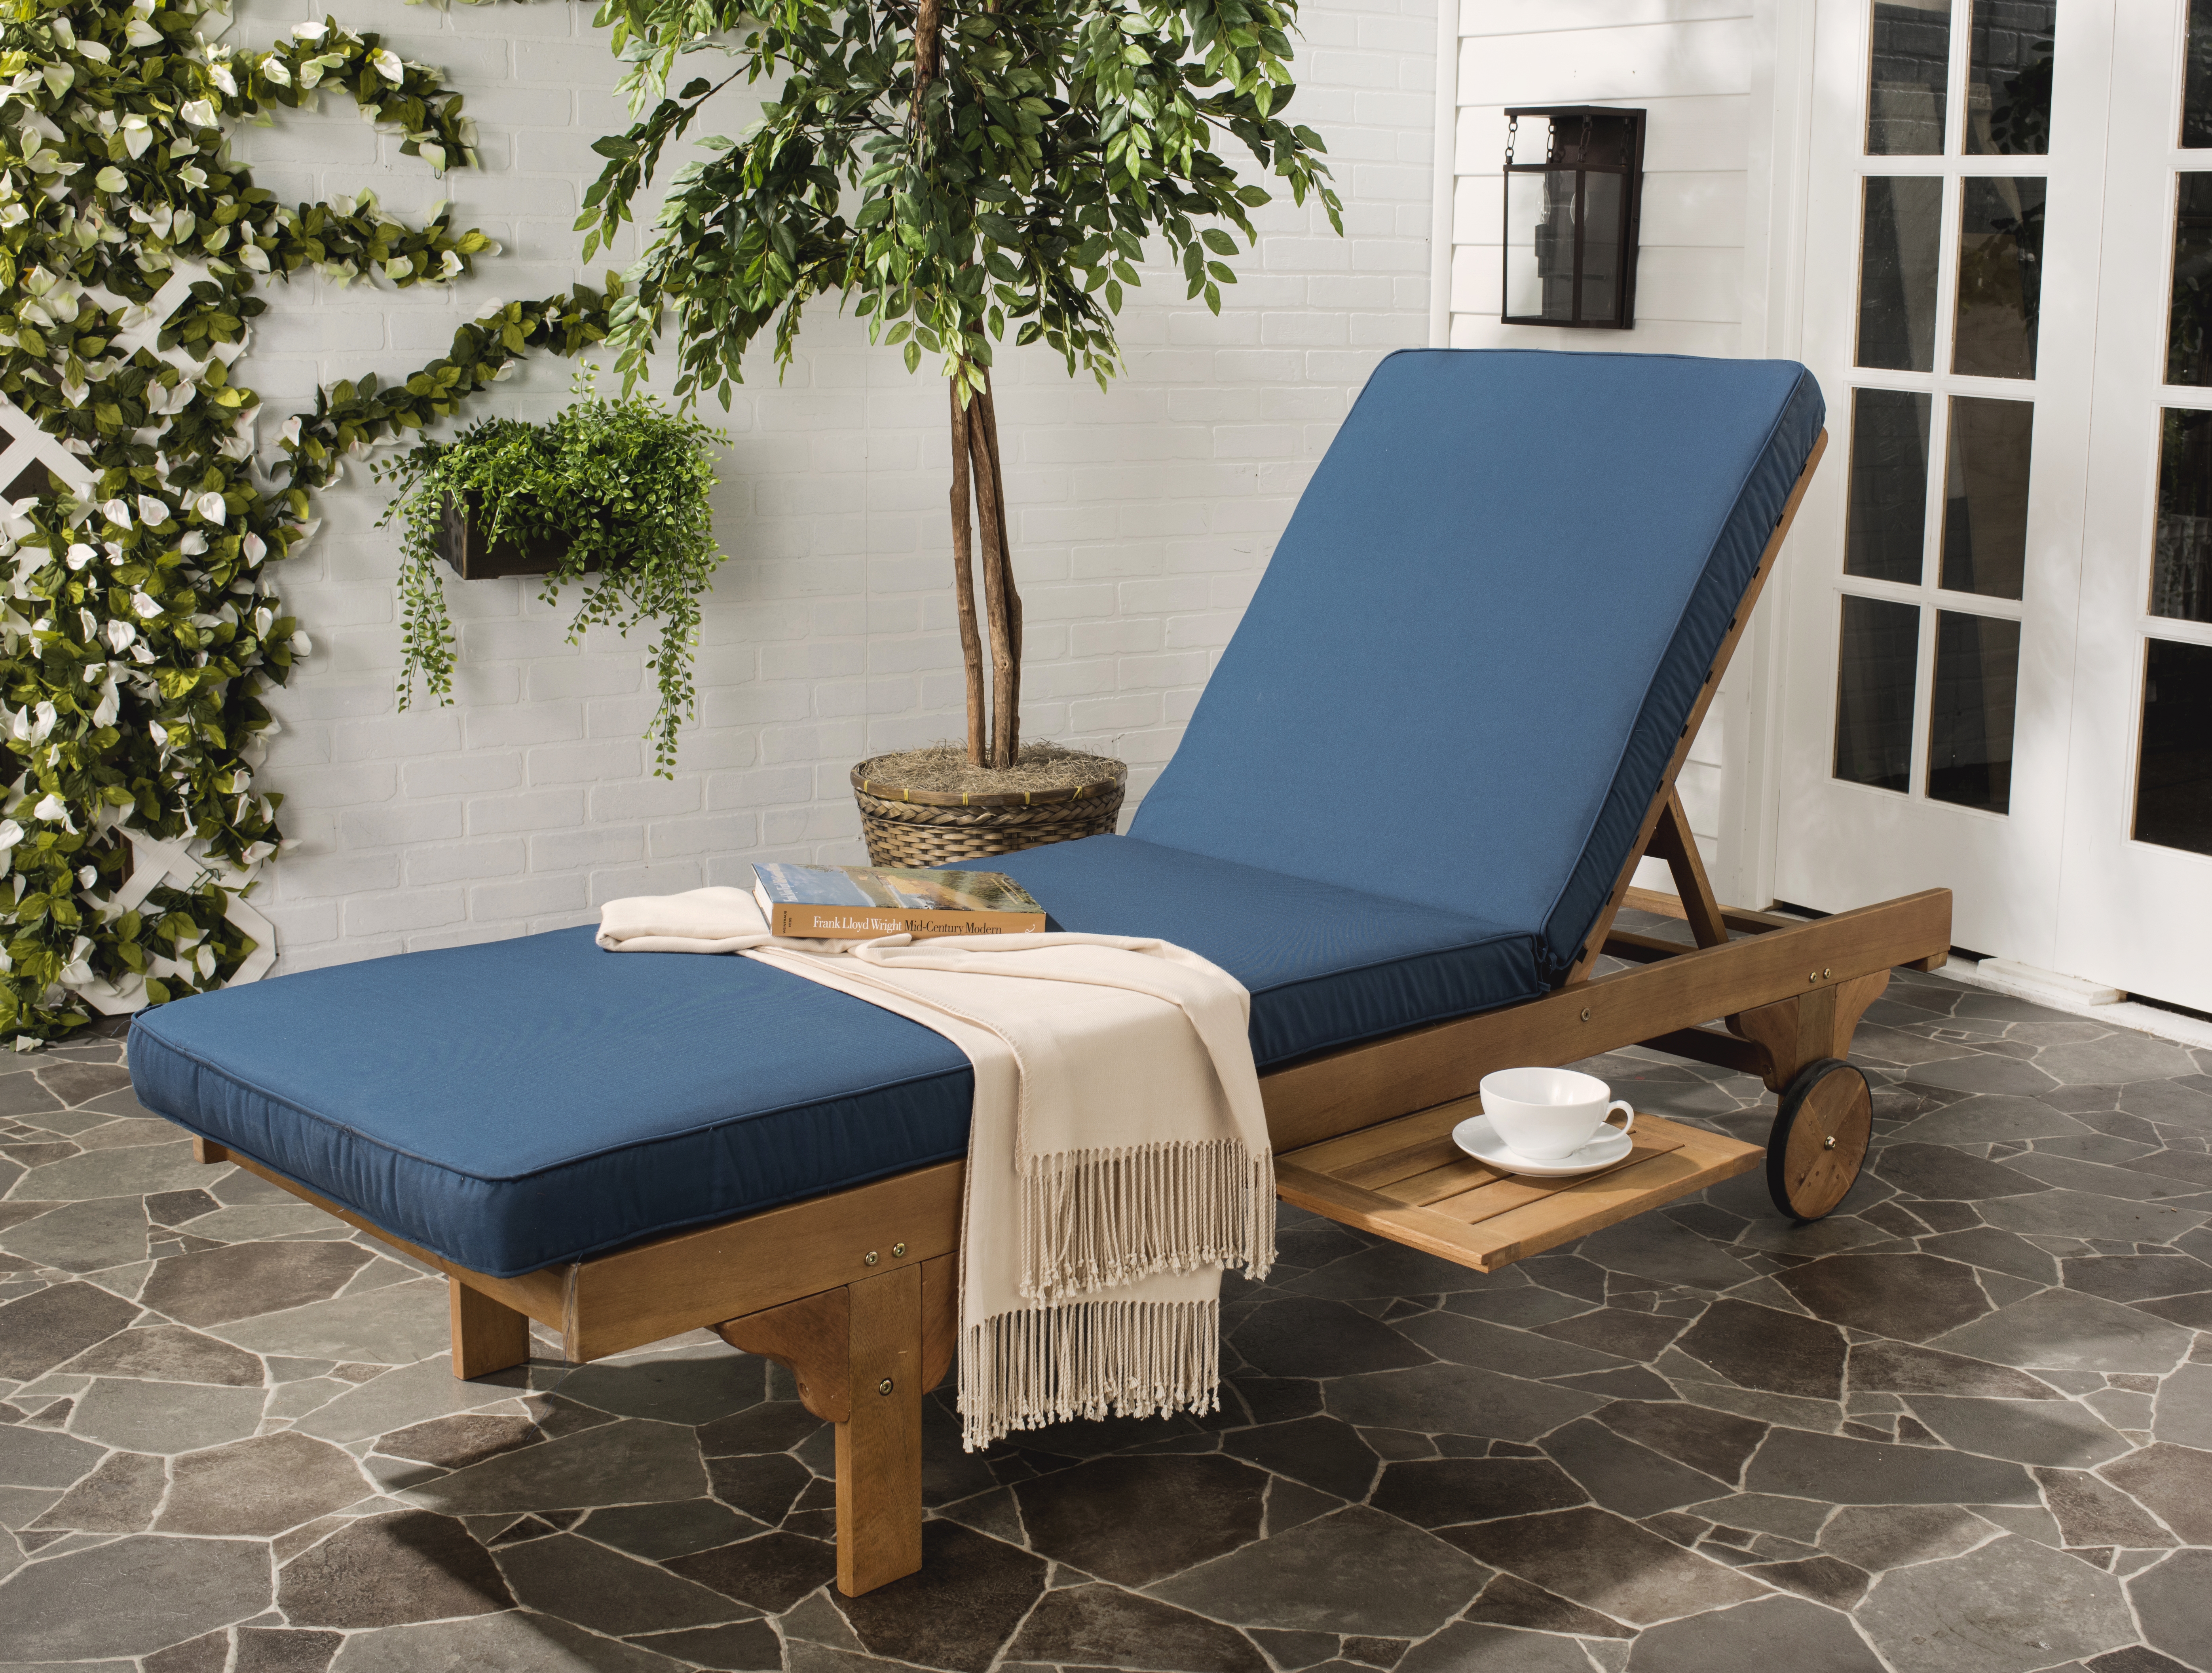 Newport Chaise Lounge Chair With Side Table - Natural/Navy - Arlo Home - Image 6